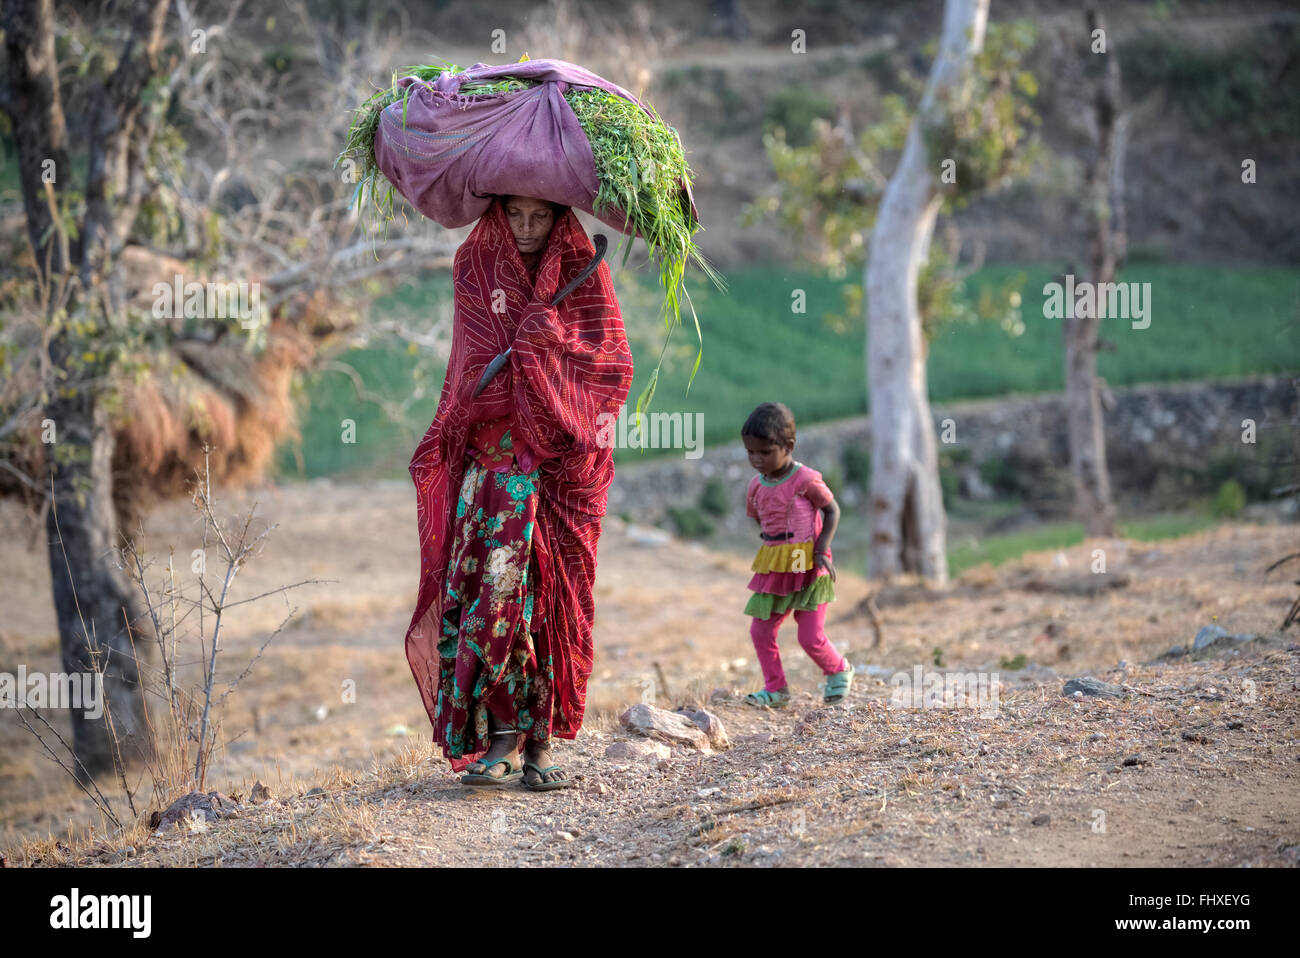 woman carrying grass on her head in rural Rajasthan, India Stock Photo